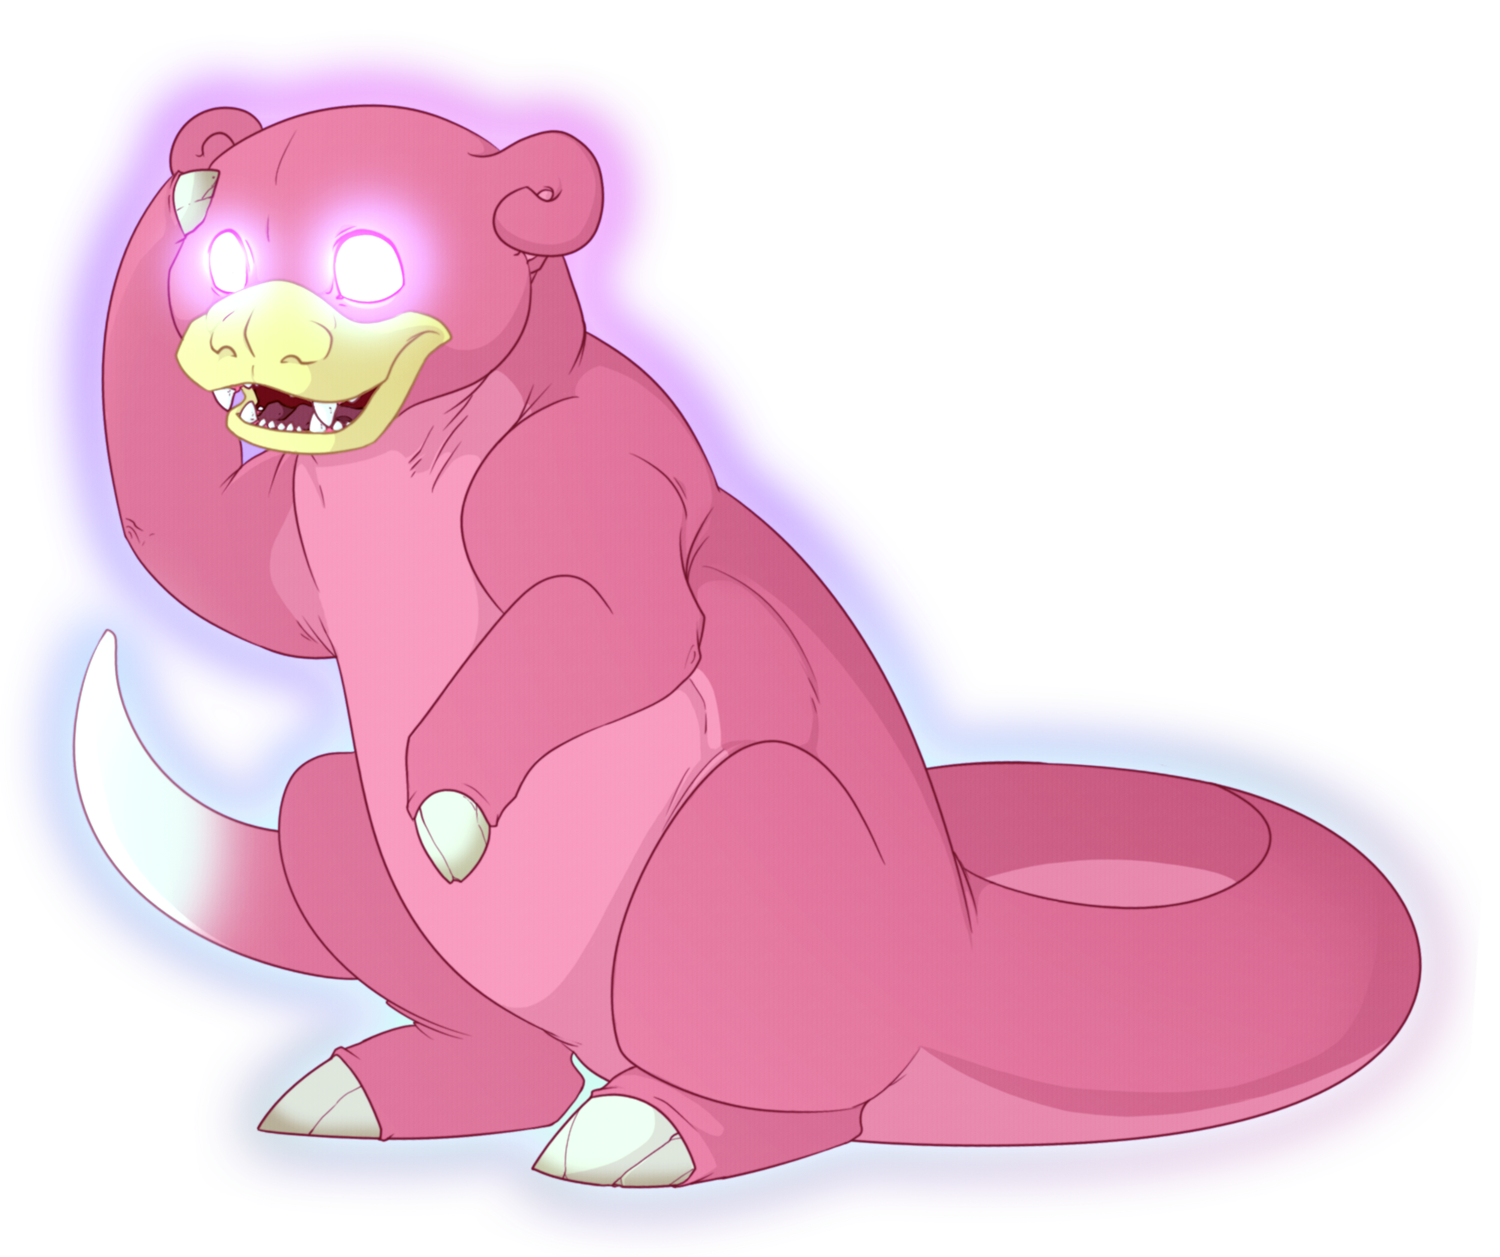 slowpoke-used-psychic-by-tigryph